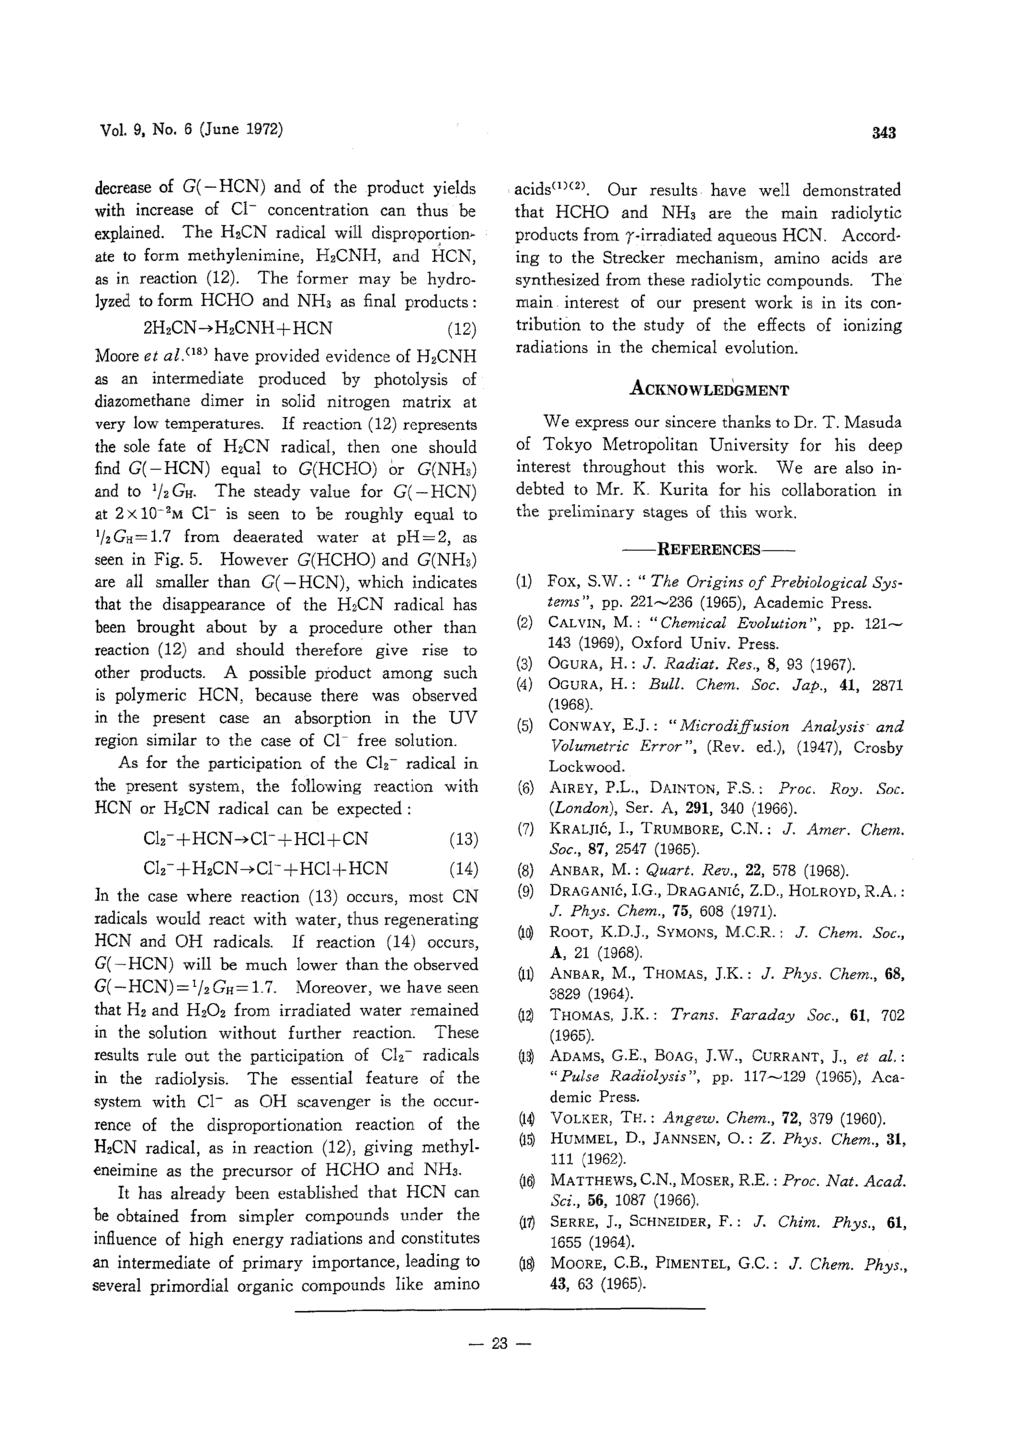 Vol. 9, No. 6 (June 1972) decrease of G(-HCN) and of the product yields with increase of Cl- concentration can thus be explained.